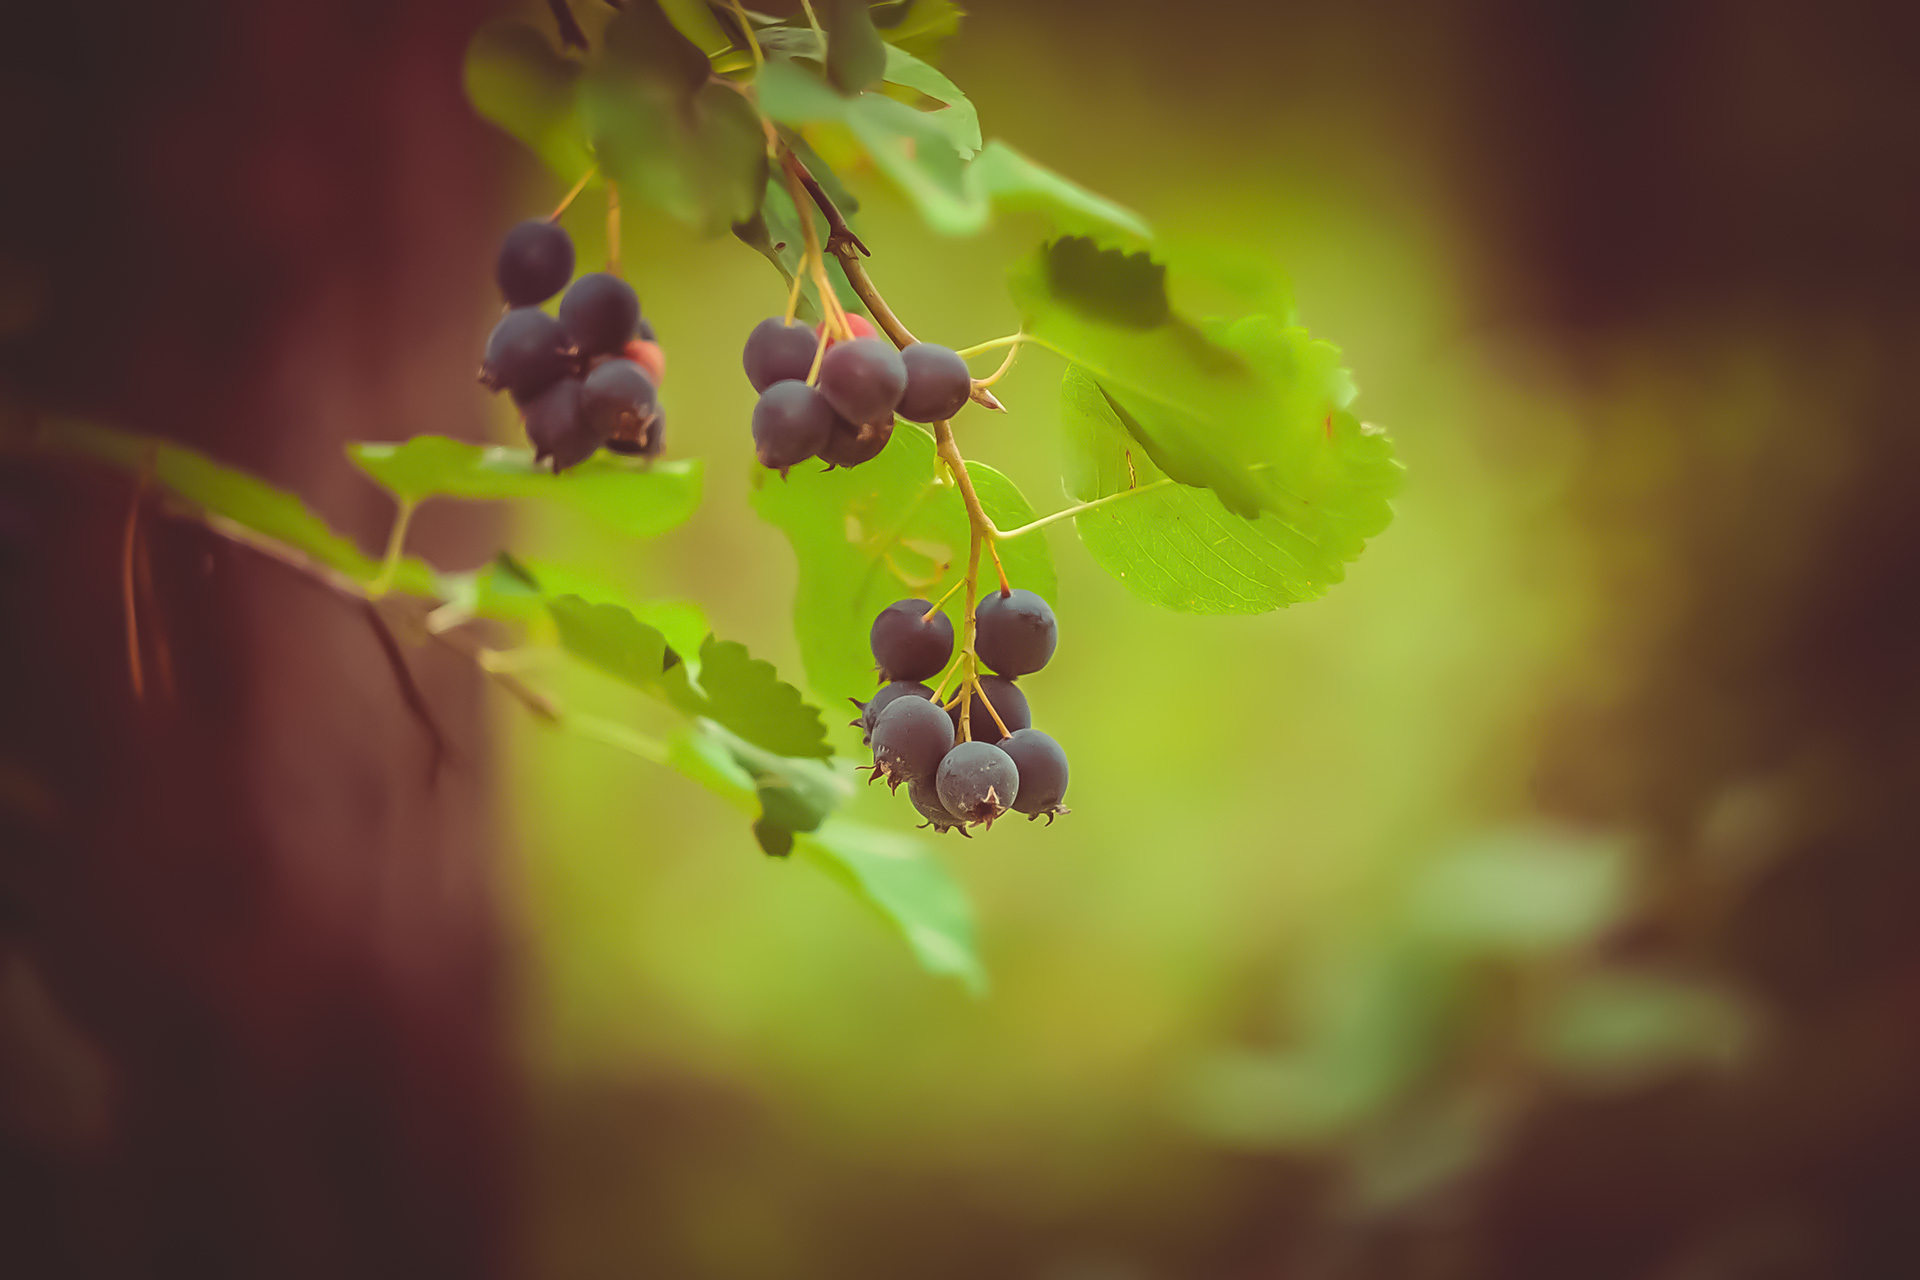 156966 download wallpaper leaves, macro, branch, berry, irga, juneberry screensavers and pictures for free